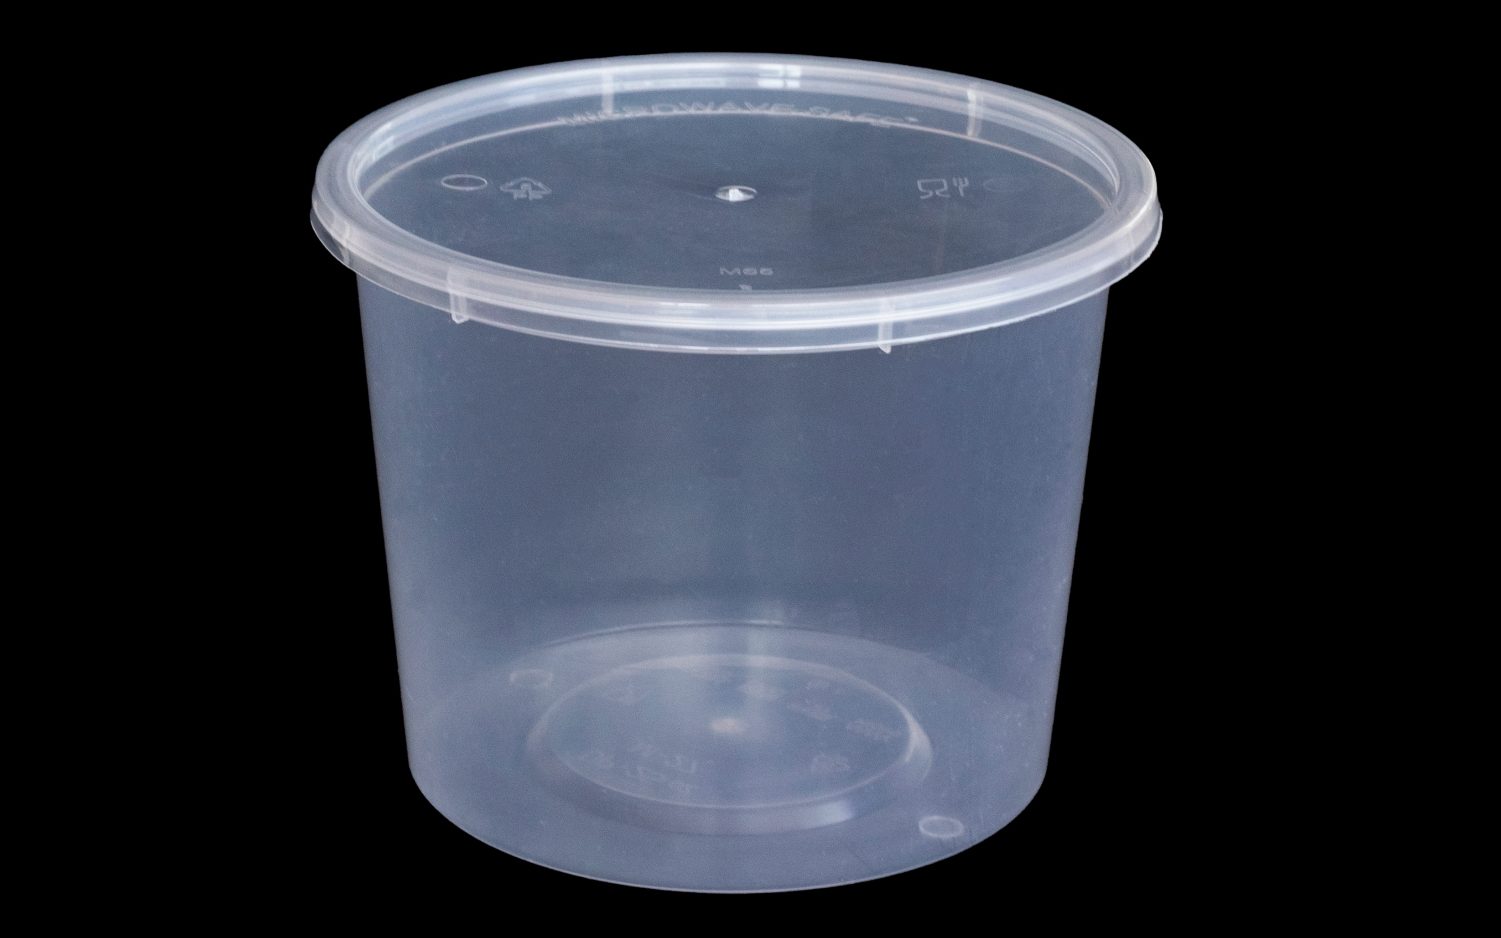 Damati 750 ml (25 Oz) Round Food Container by channel packaging 